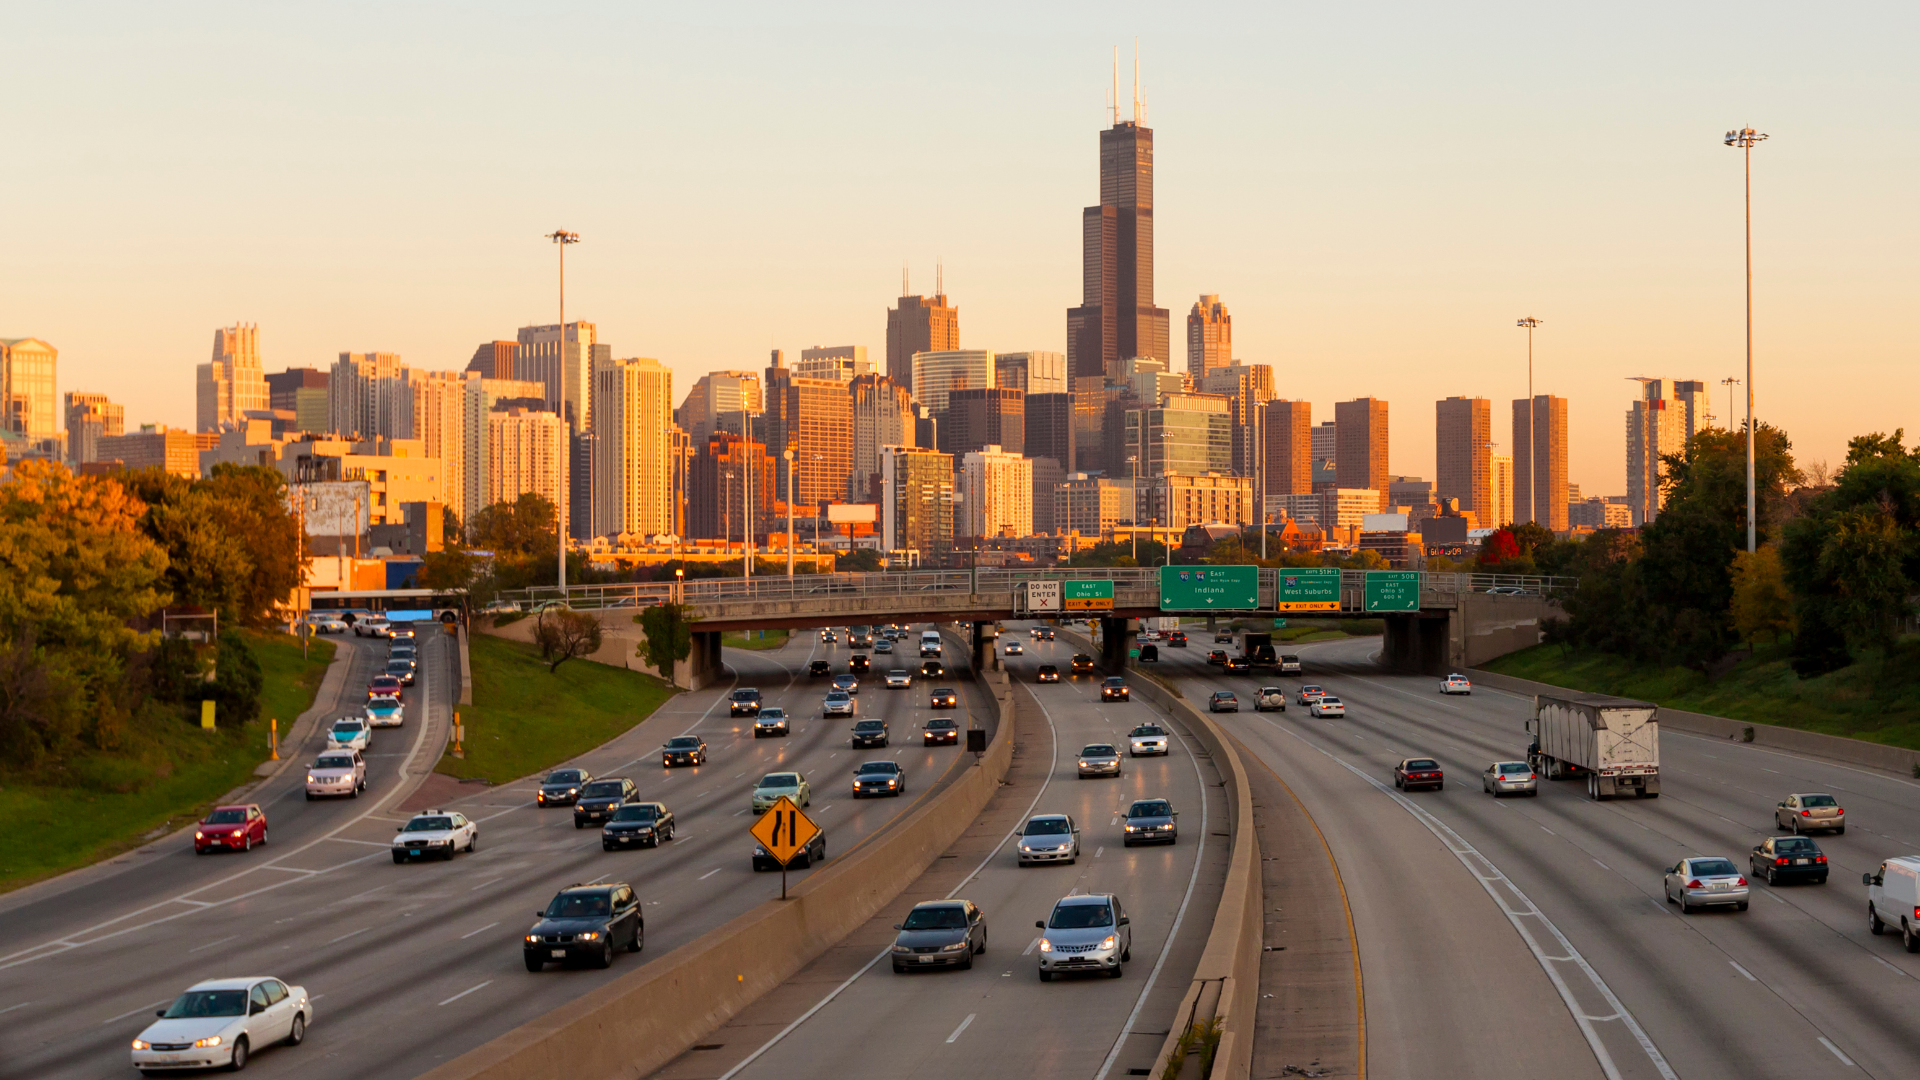 &lt;span style=&quot;font-size: 0.8em;&quot;&gt;An image of the Dan Ryan Expressway in Chicago, Ill. Chicago ranks among the most-congested cities in the U.S due to its recent economic growth and proximity to Lake Michigan.&lt;/span&gt;